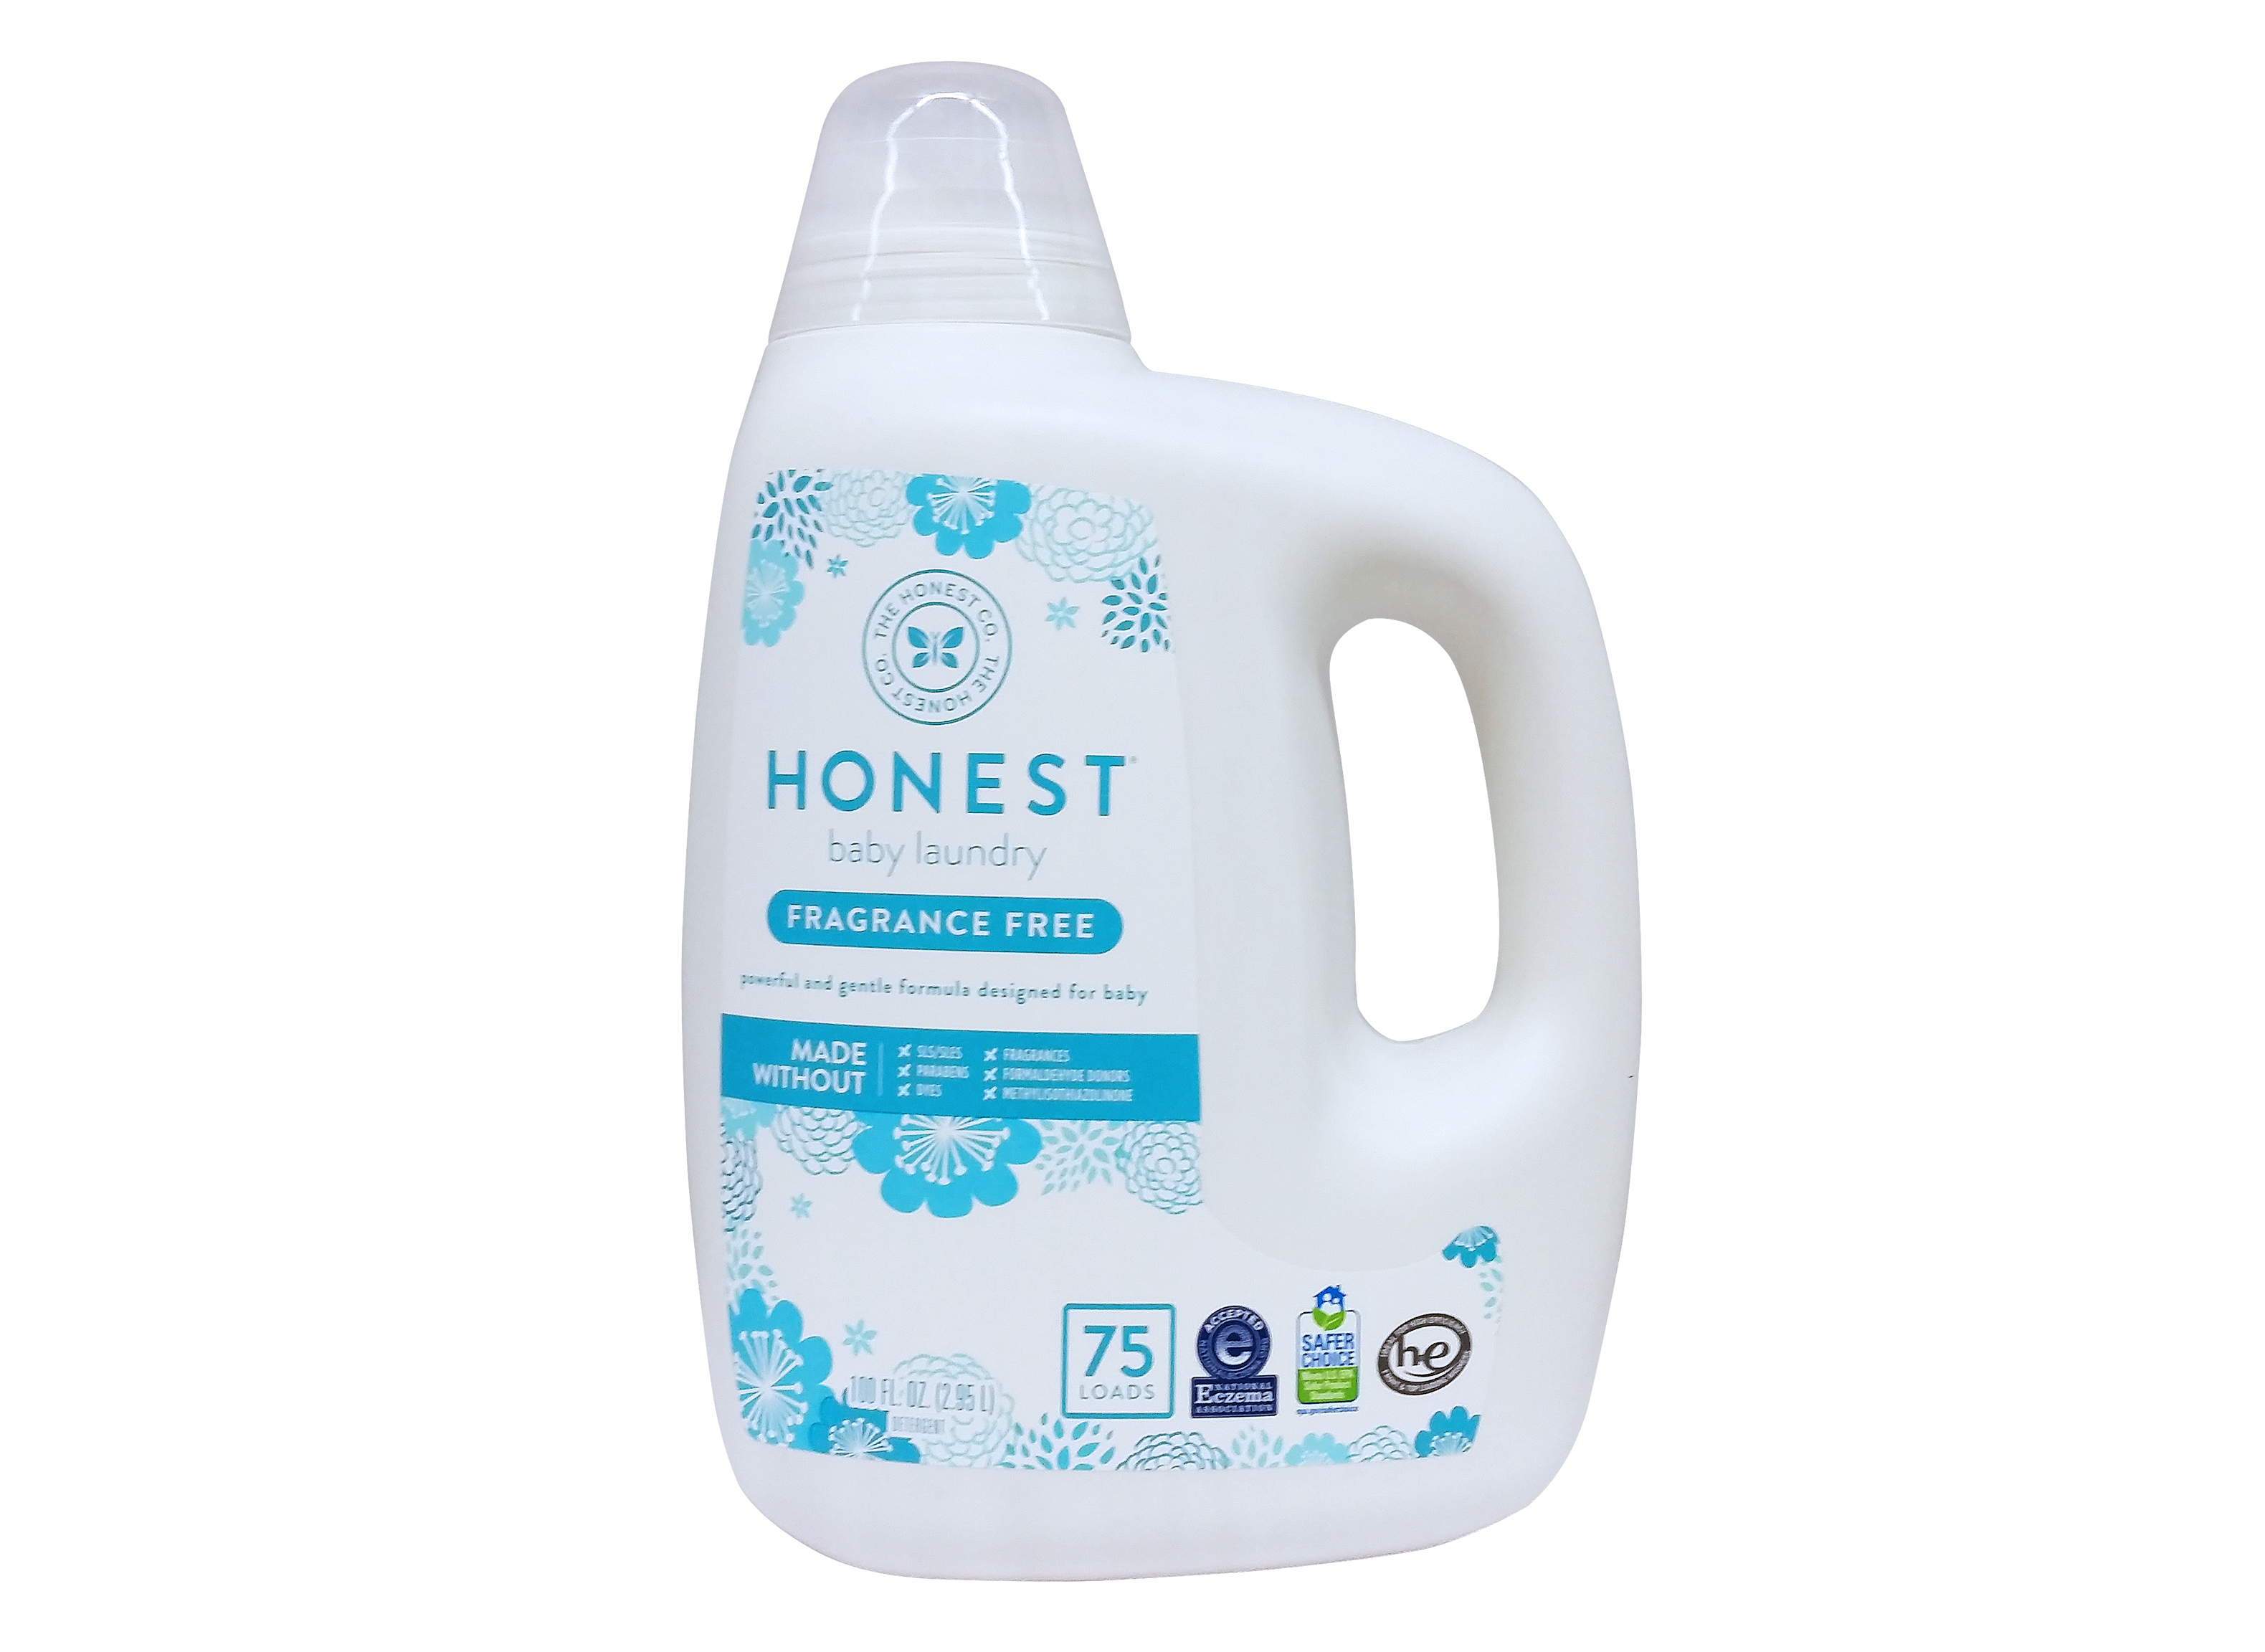 The Honest Company Baby Laundry Fragrance Free Laundry Detergent Review -  Consumer Reports